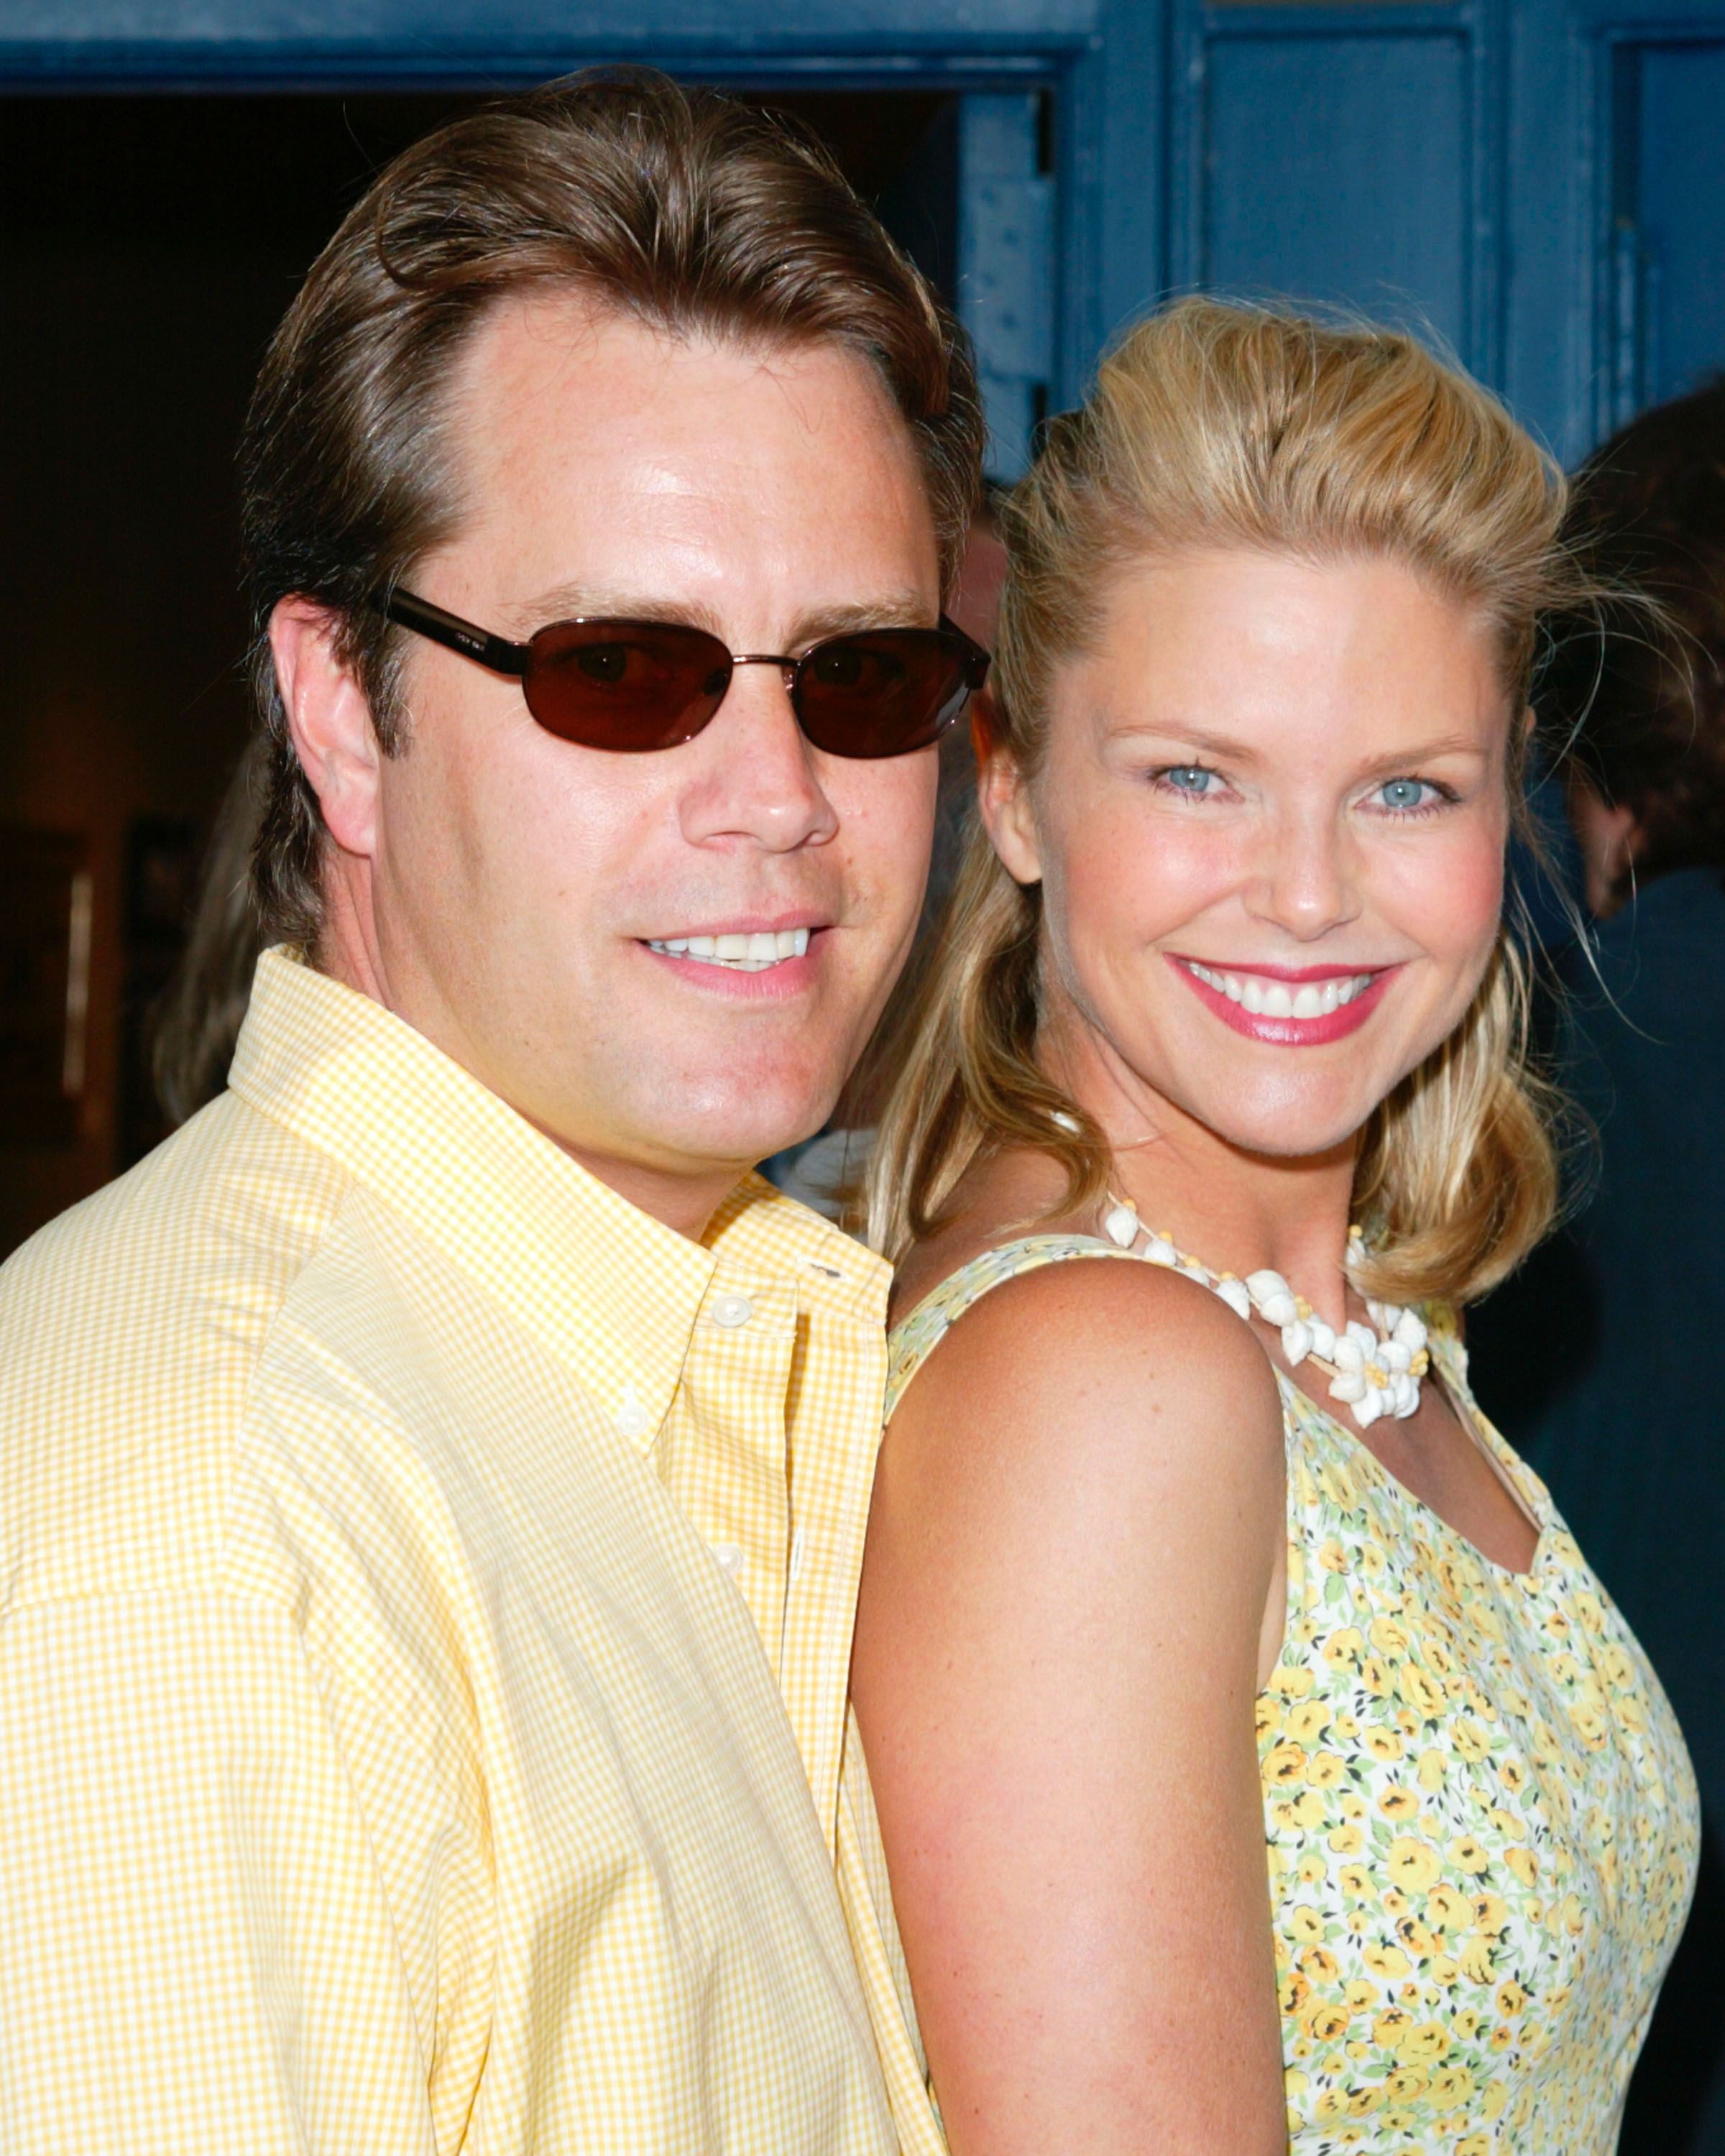 Christie Brinkley (R) and Peter Cook (L) arrive for the premiere of "The Hamptons" June 1, 2002 in Sag Harbor, NY. | Source: Getty Images